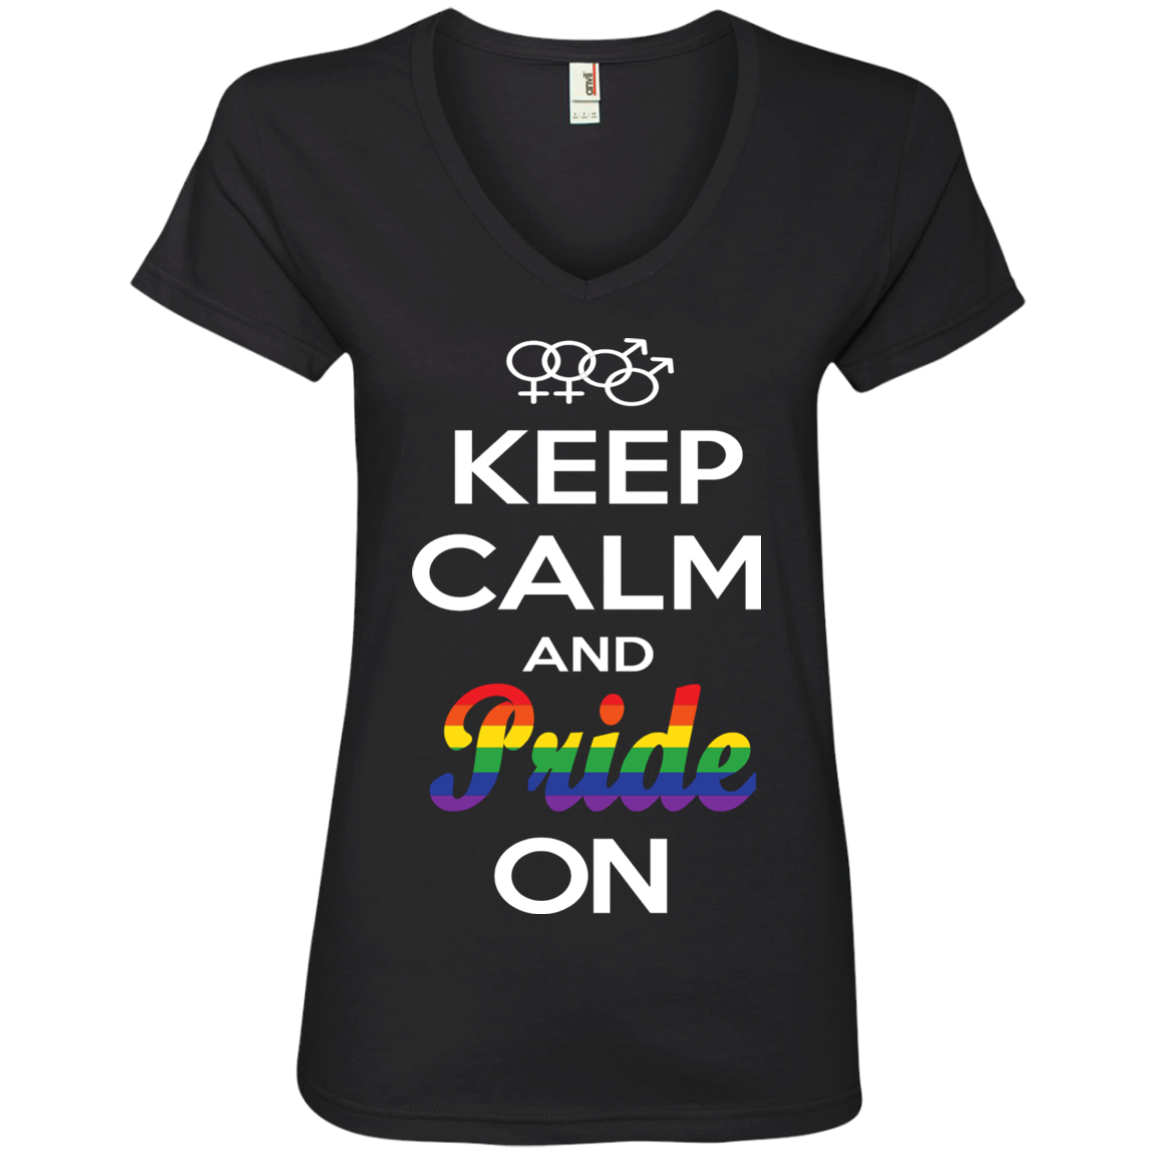 Keep Calm And Pride On